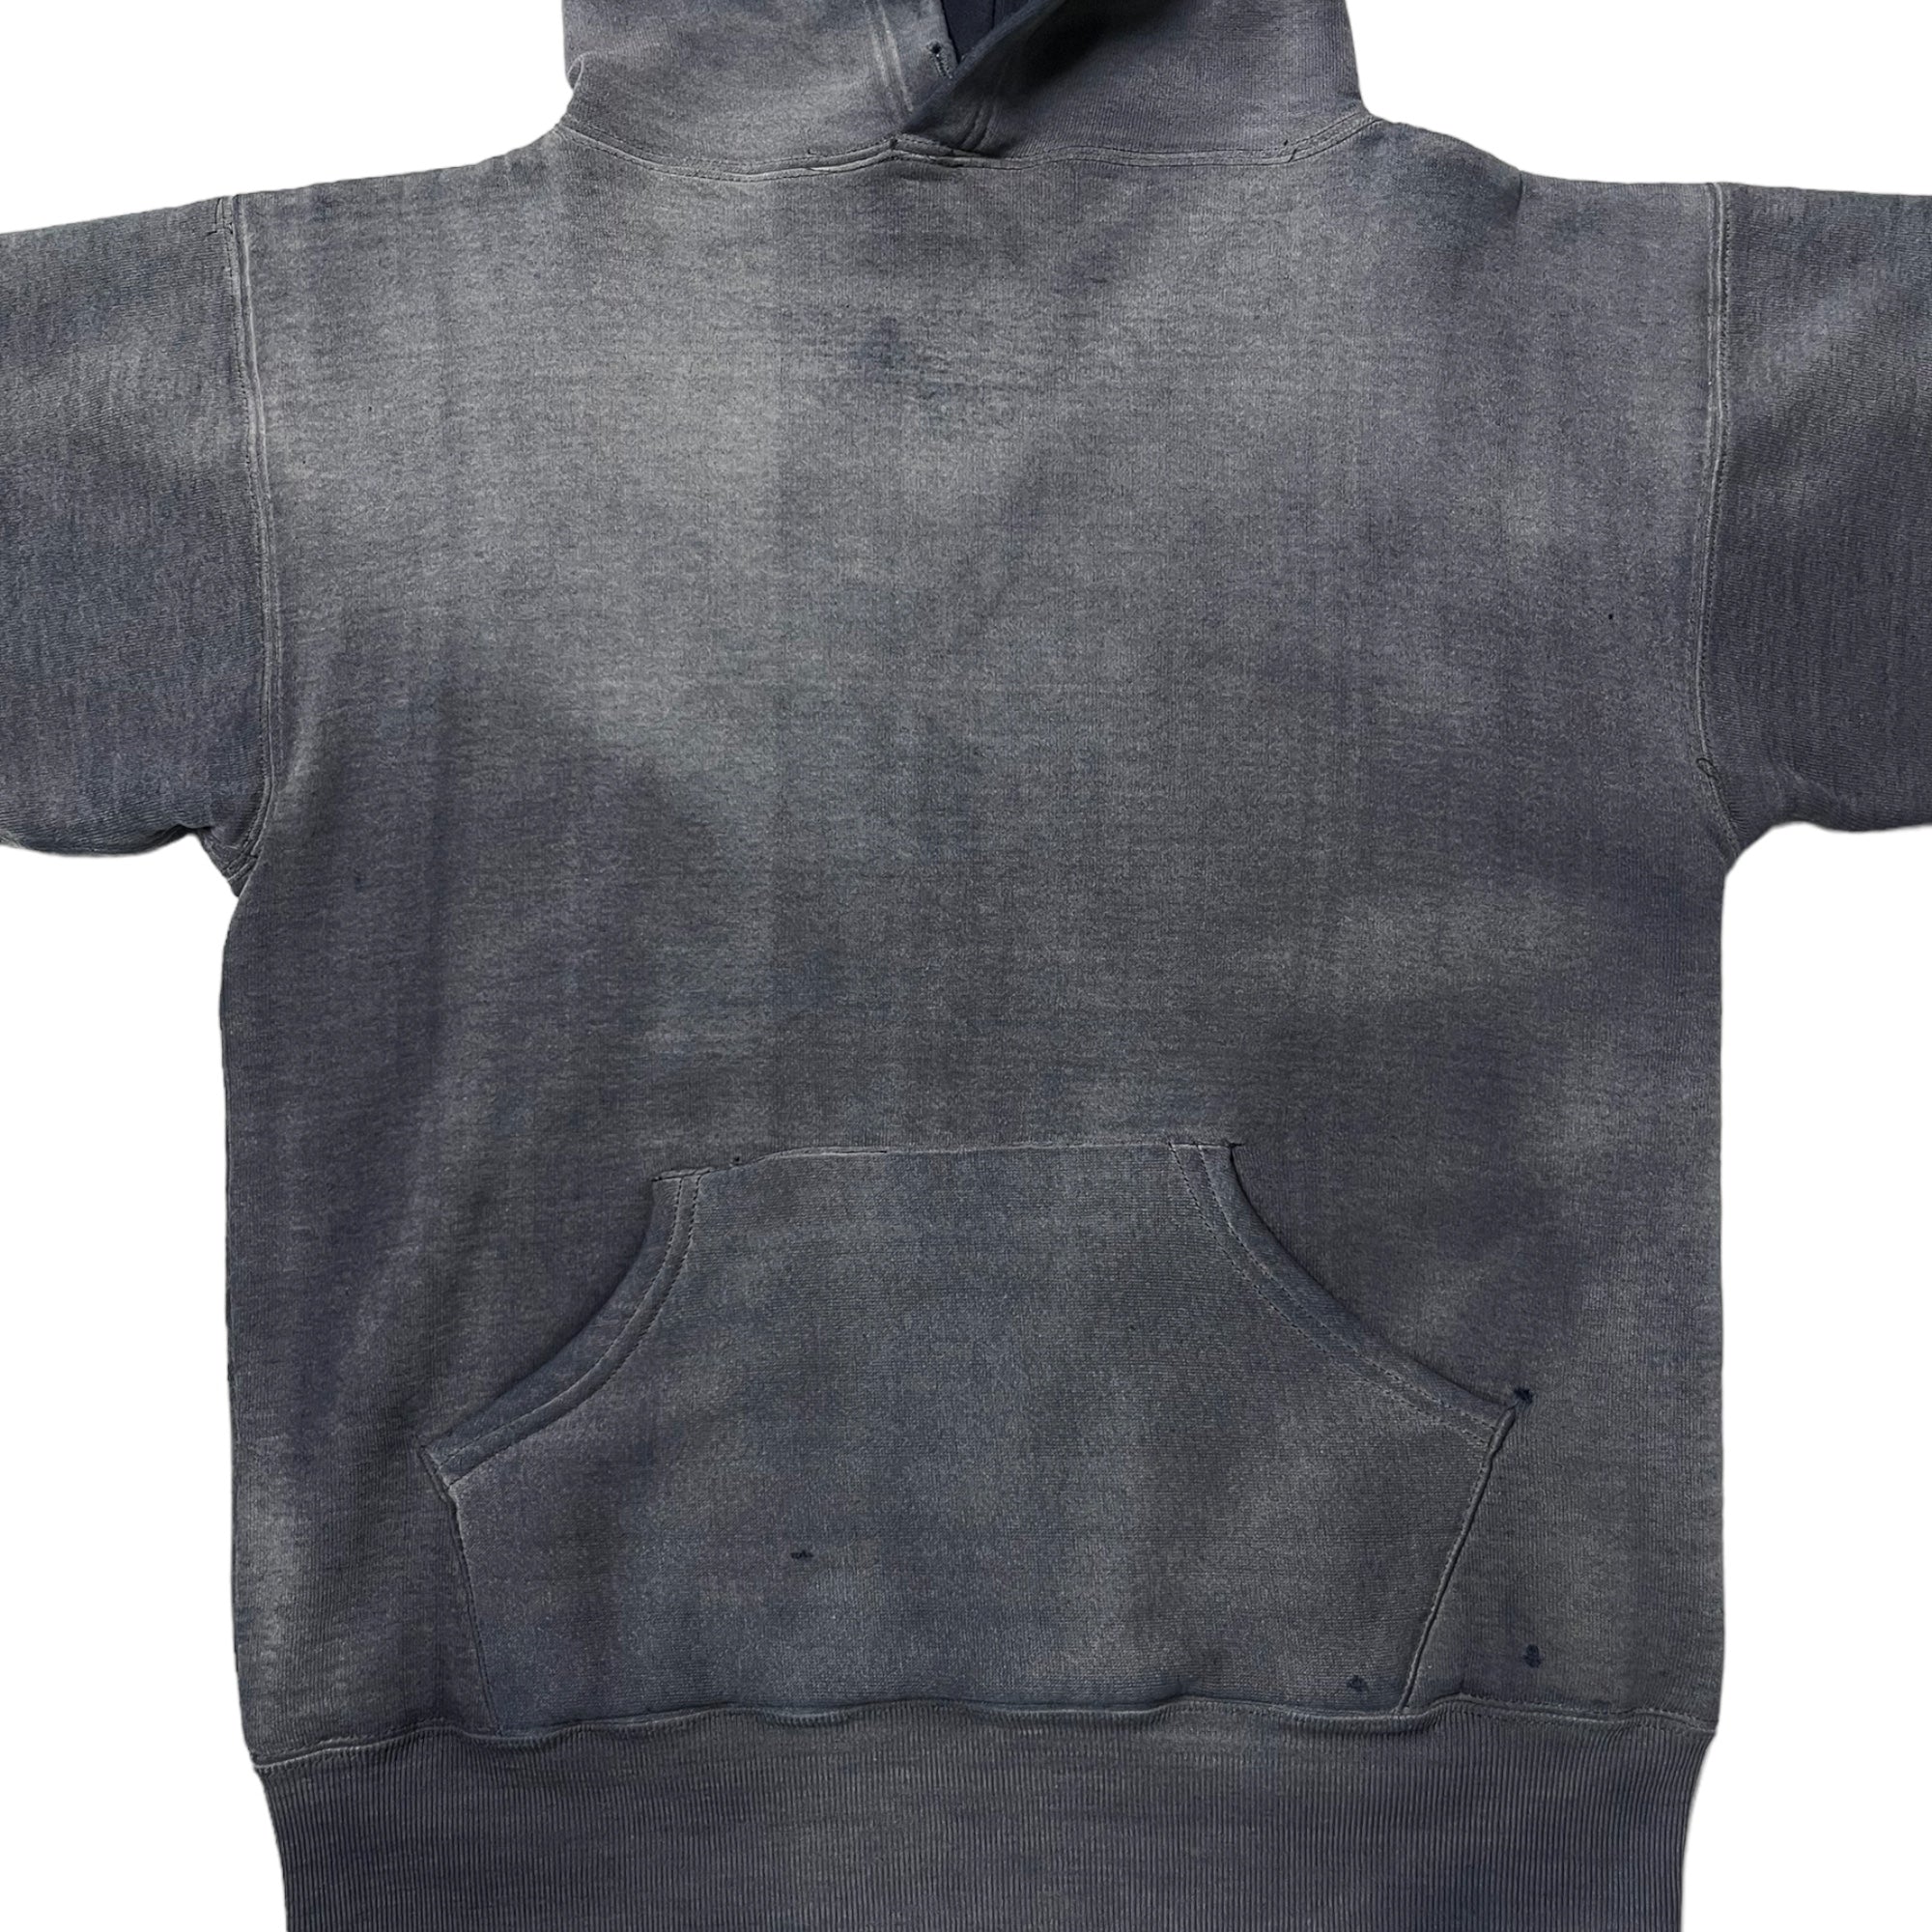 ‘70s Russell Sun Faded Double-Face Hooded Sweatshirt - Ghost Gray/Faded Navy - S